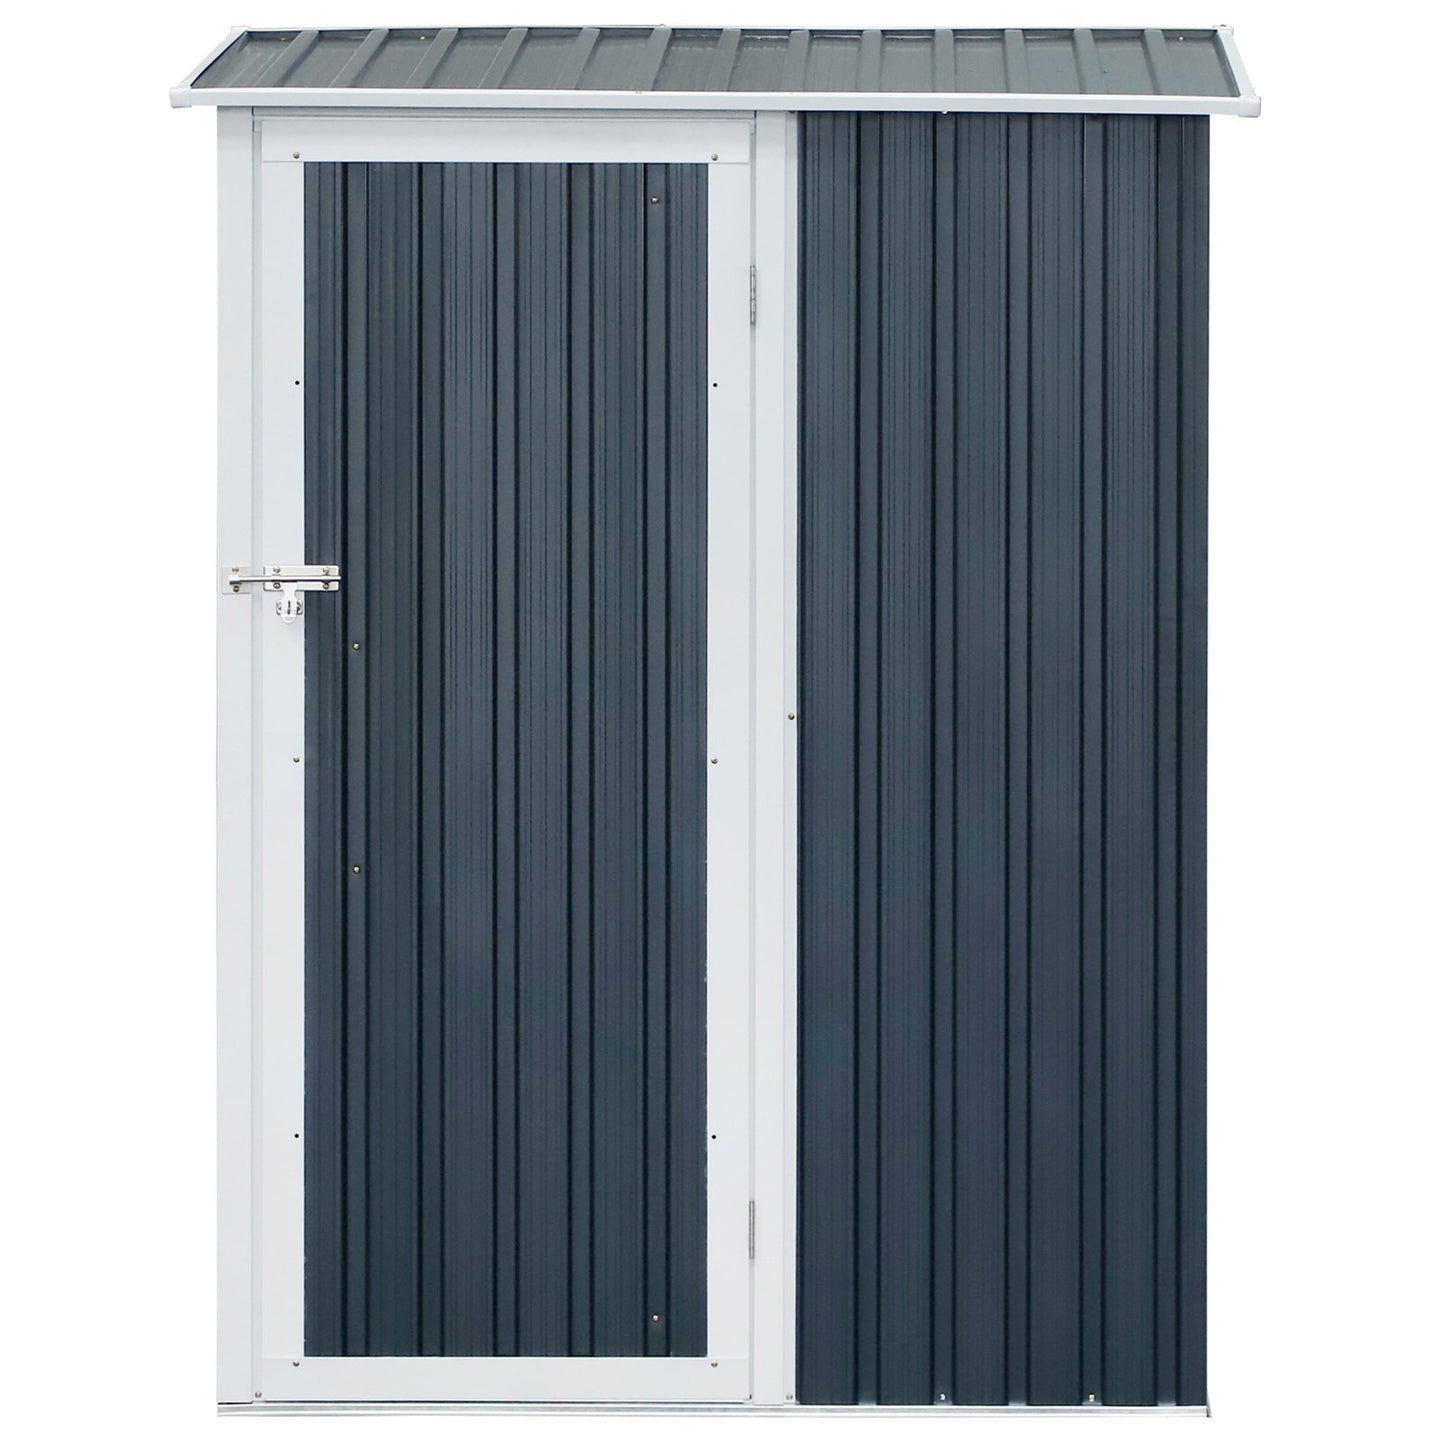 Outsunny Corrugated Steel Single Door Storage Garden Shed Outdoor Equipment Tool Sloped Roof - Grey